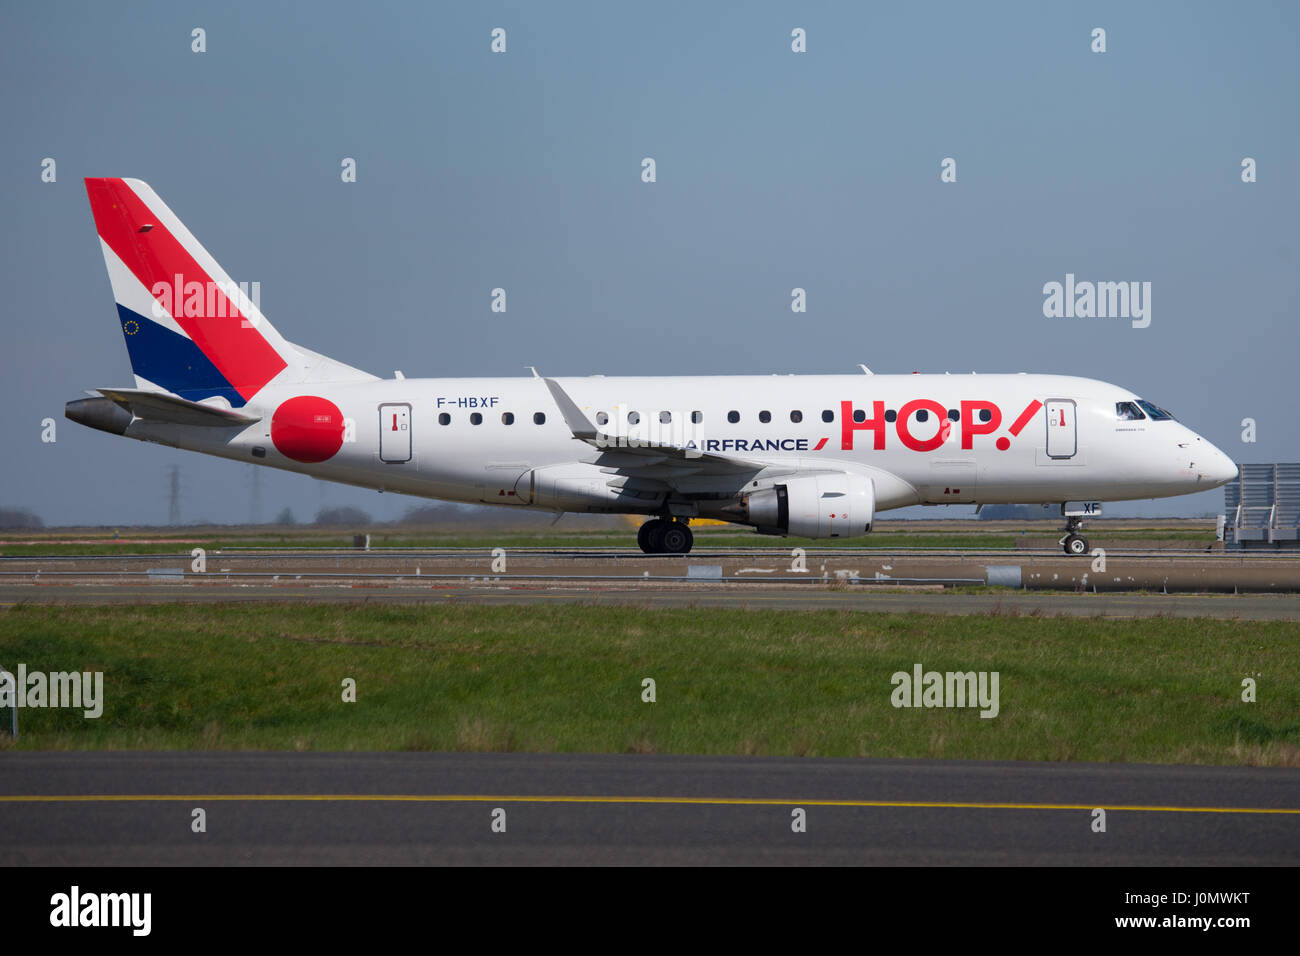 Hop by Air France Airline Image Stock Photo